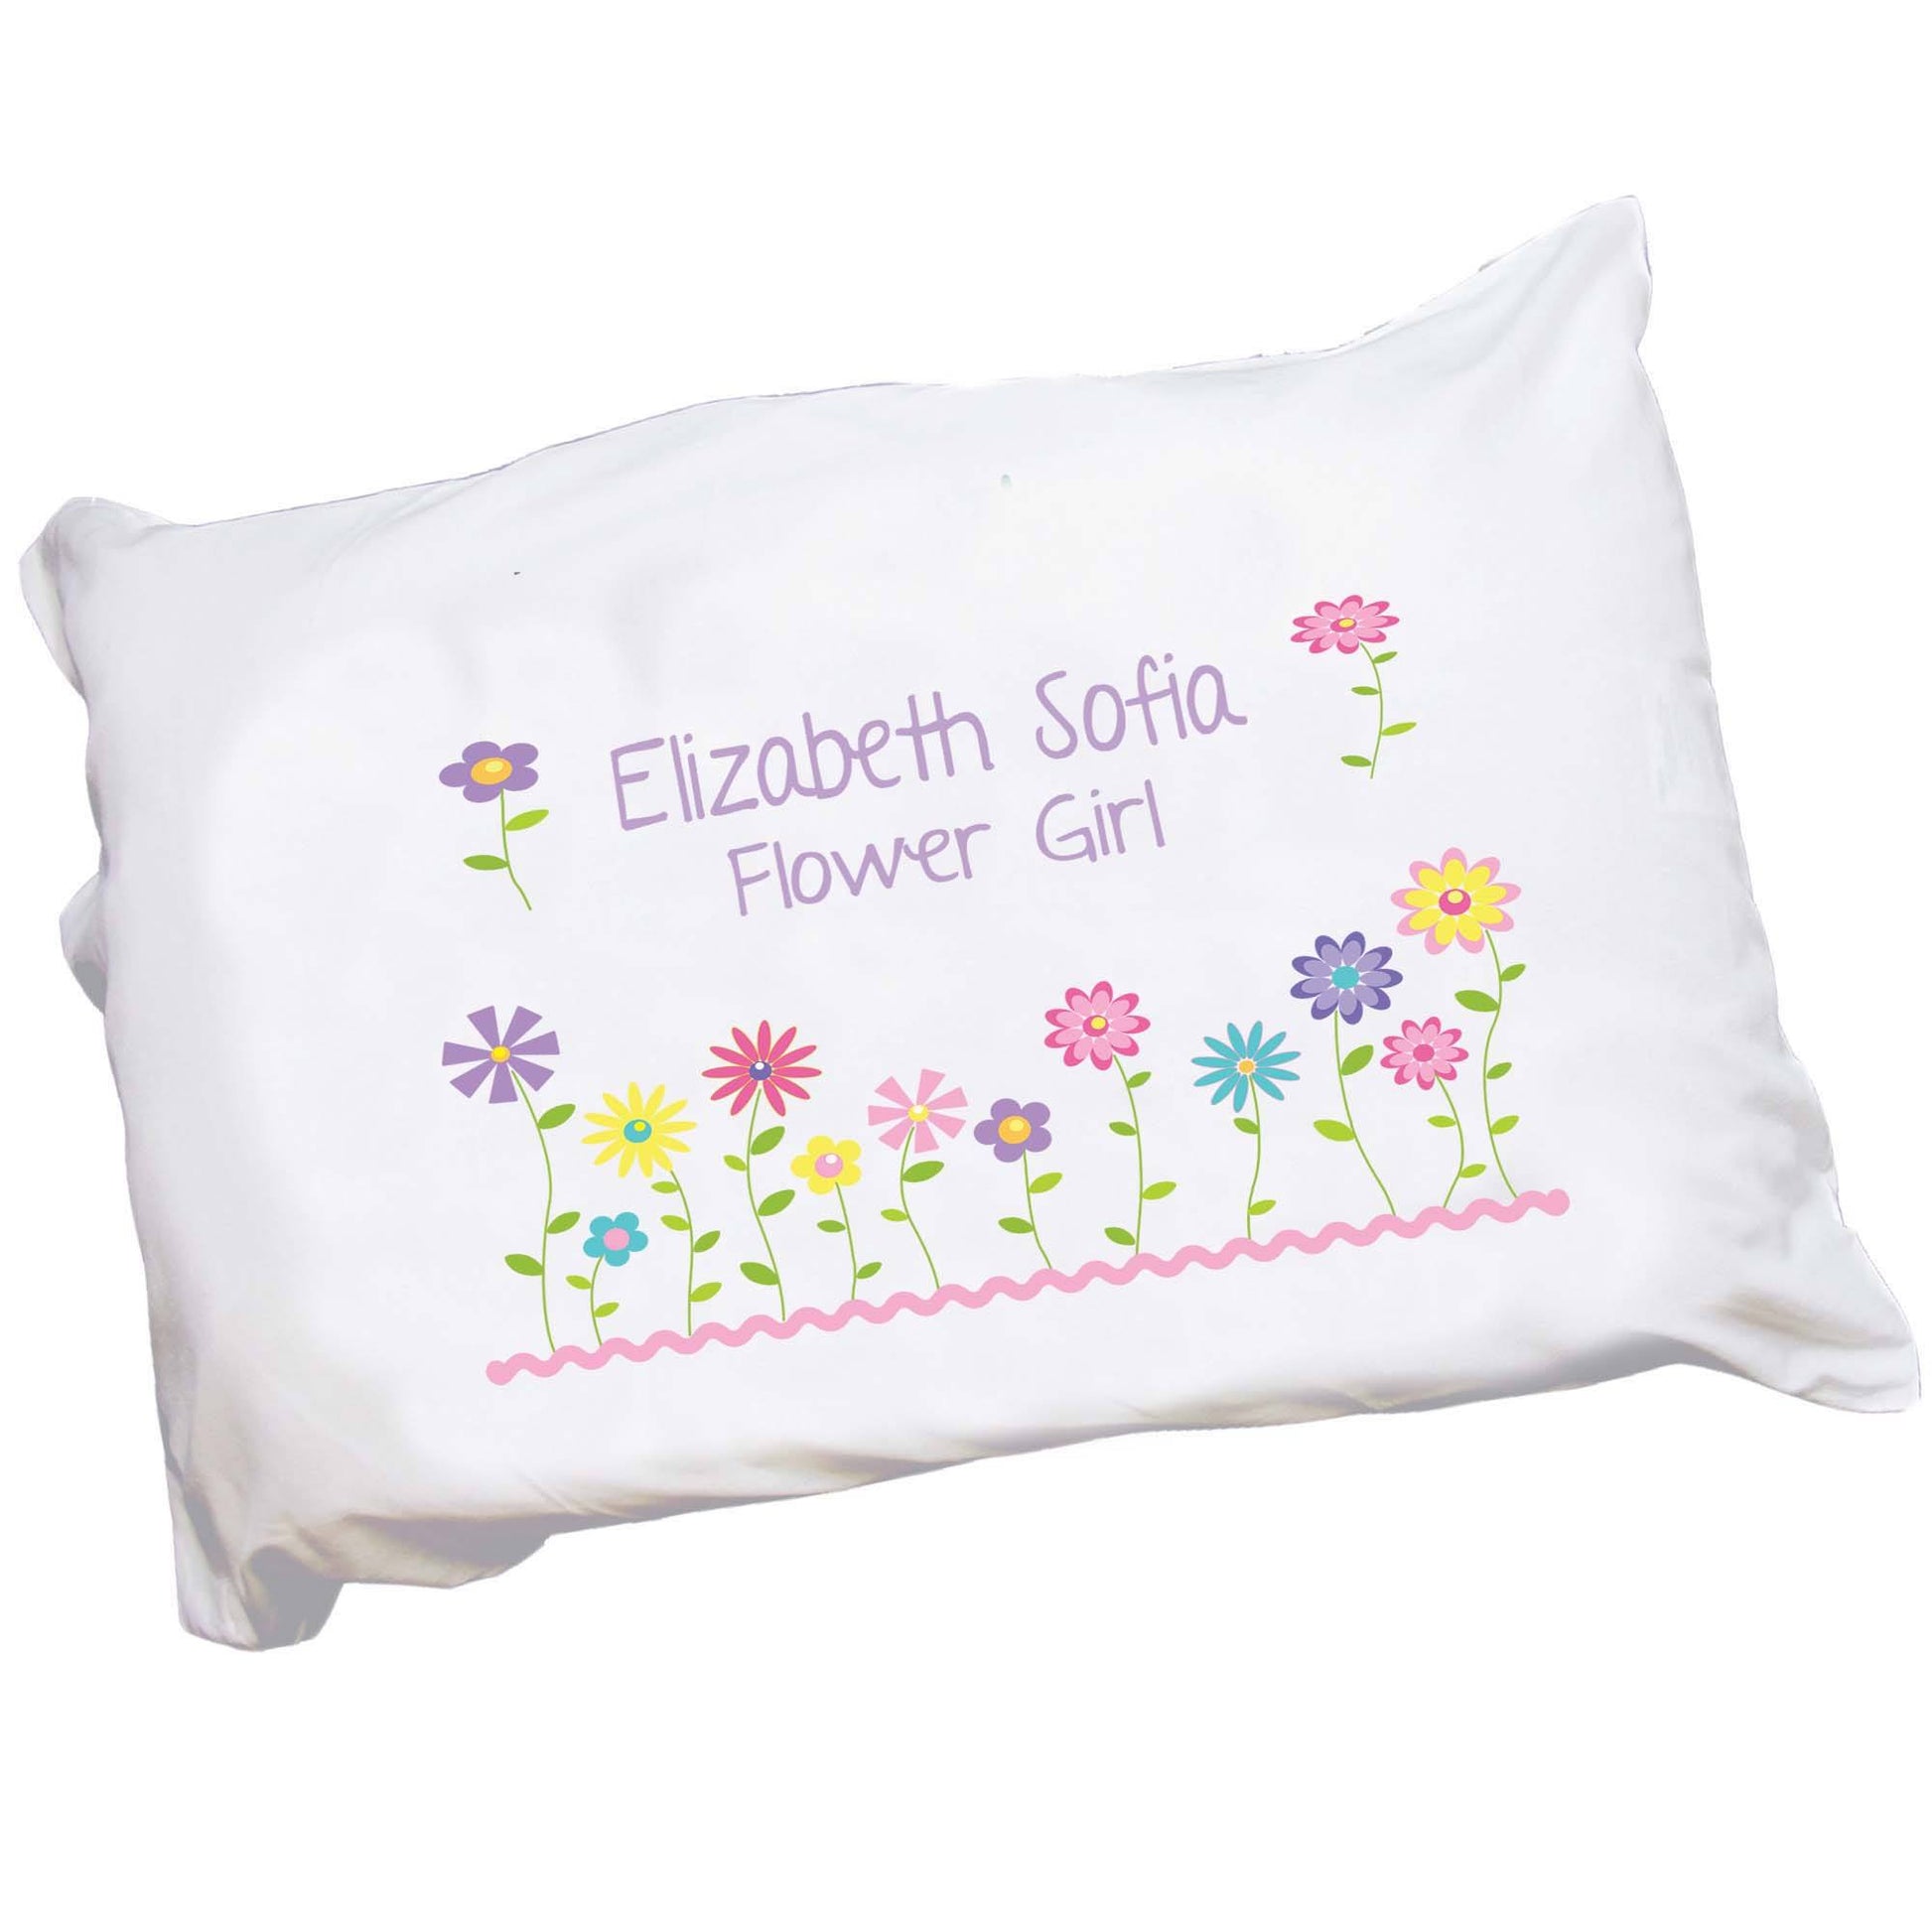 Personalized Childrens Pillowcase with Stemmed Flowers design